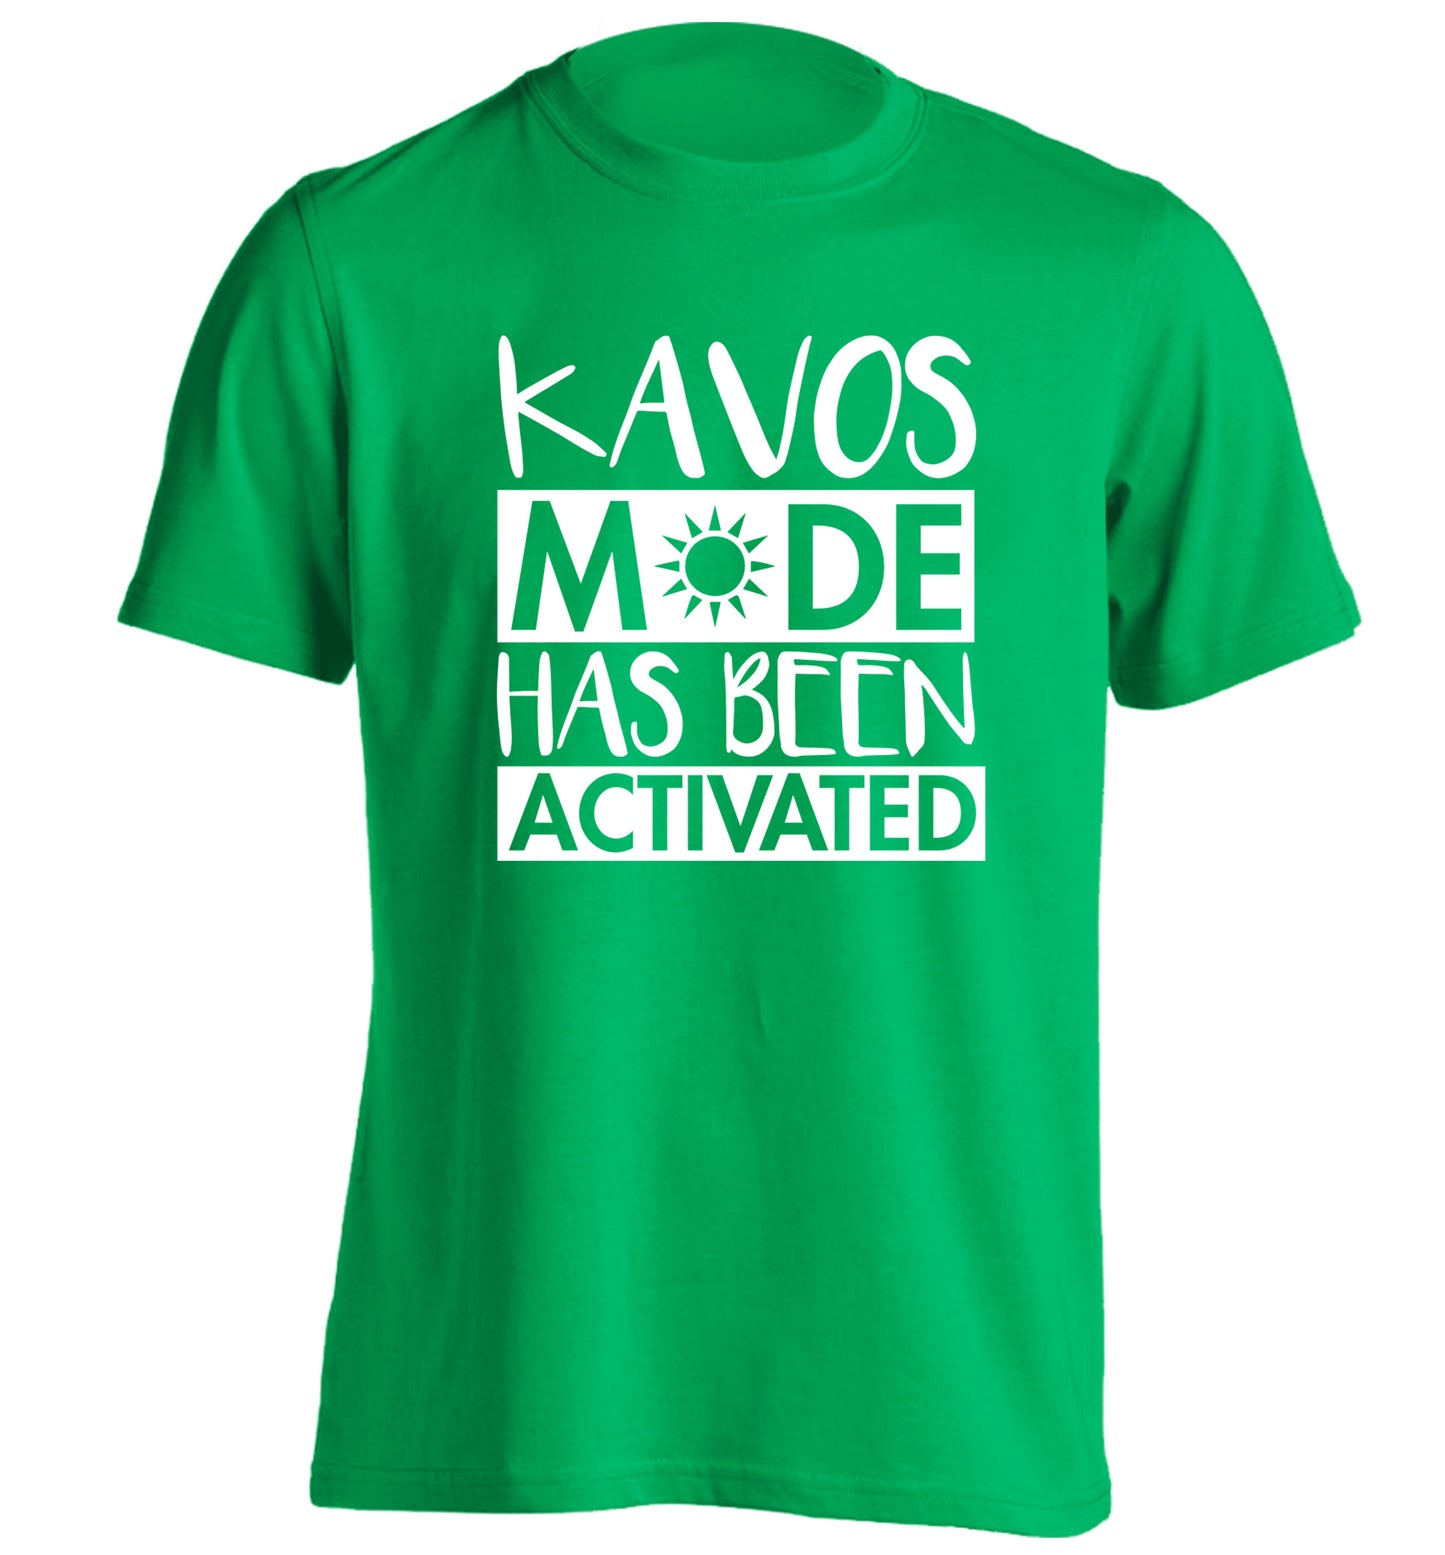 Kavos mode has been activated adults unisex green Tshirt 2XL